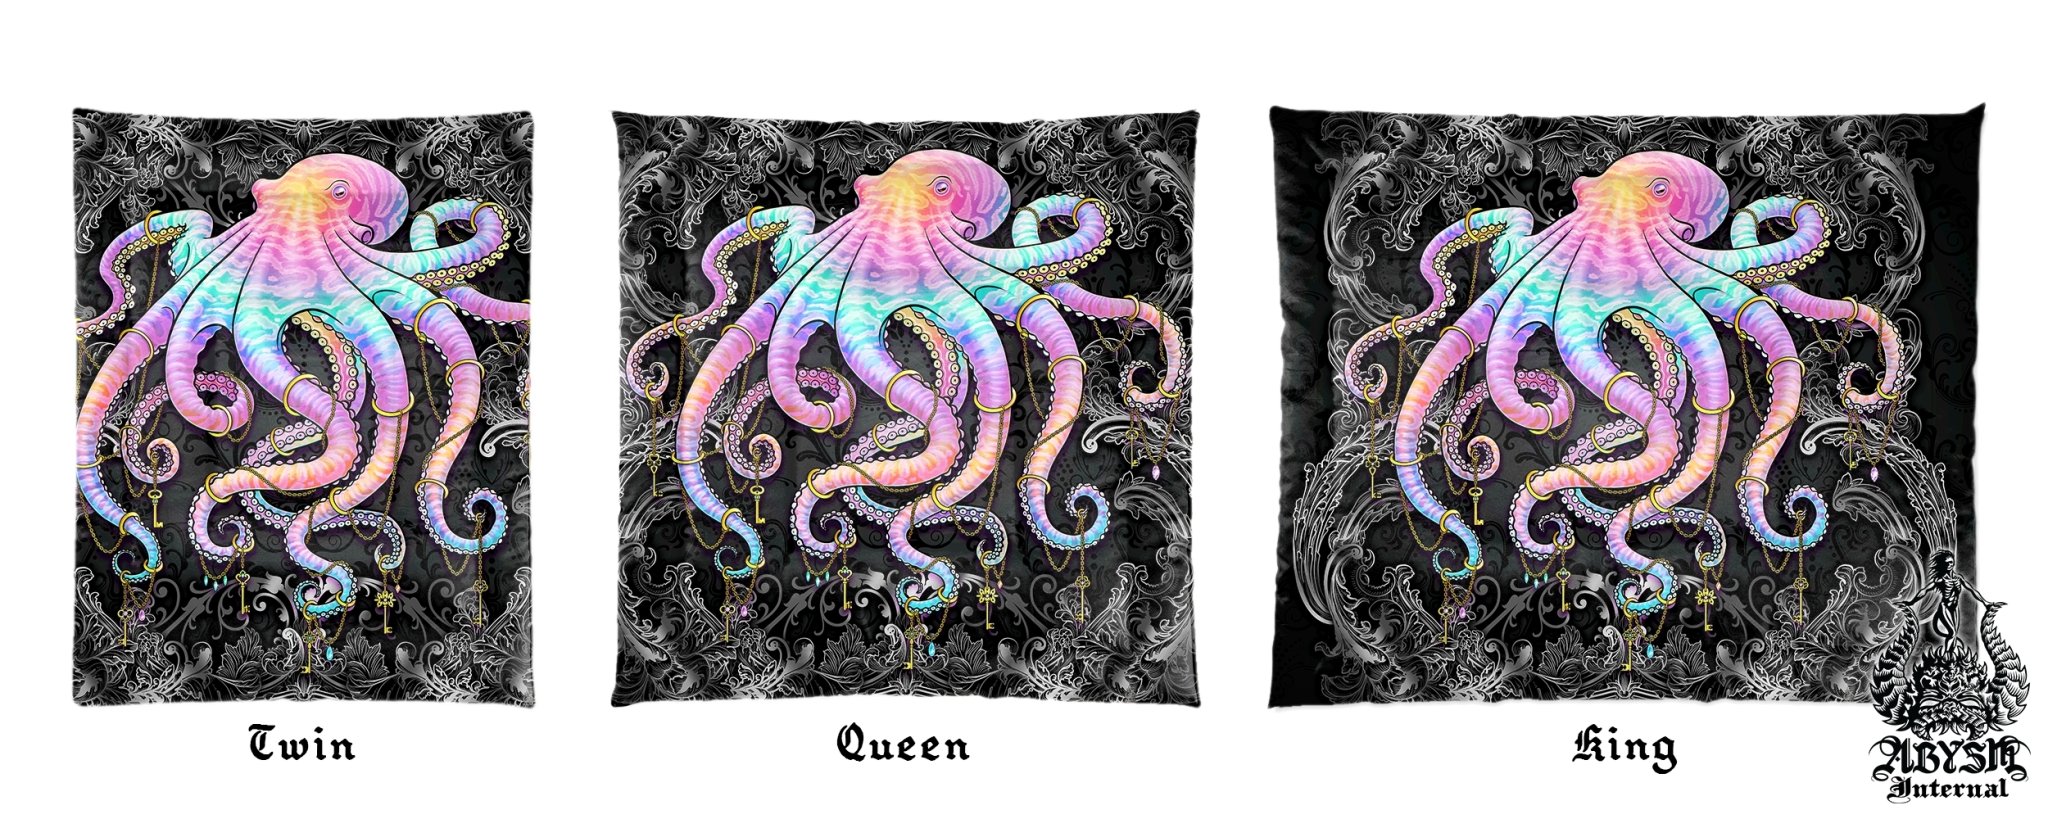 Tentacles Bedding Set, Comforter and Duvet, Beach Bed Cover, Kawaii Gamer Bedroom Decor, King, Queen and Twin Size - Pastel Punk and Black Octopus - Abysm Internal